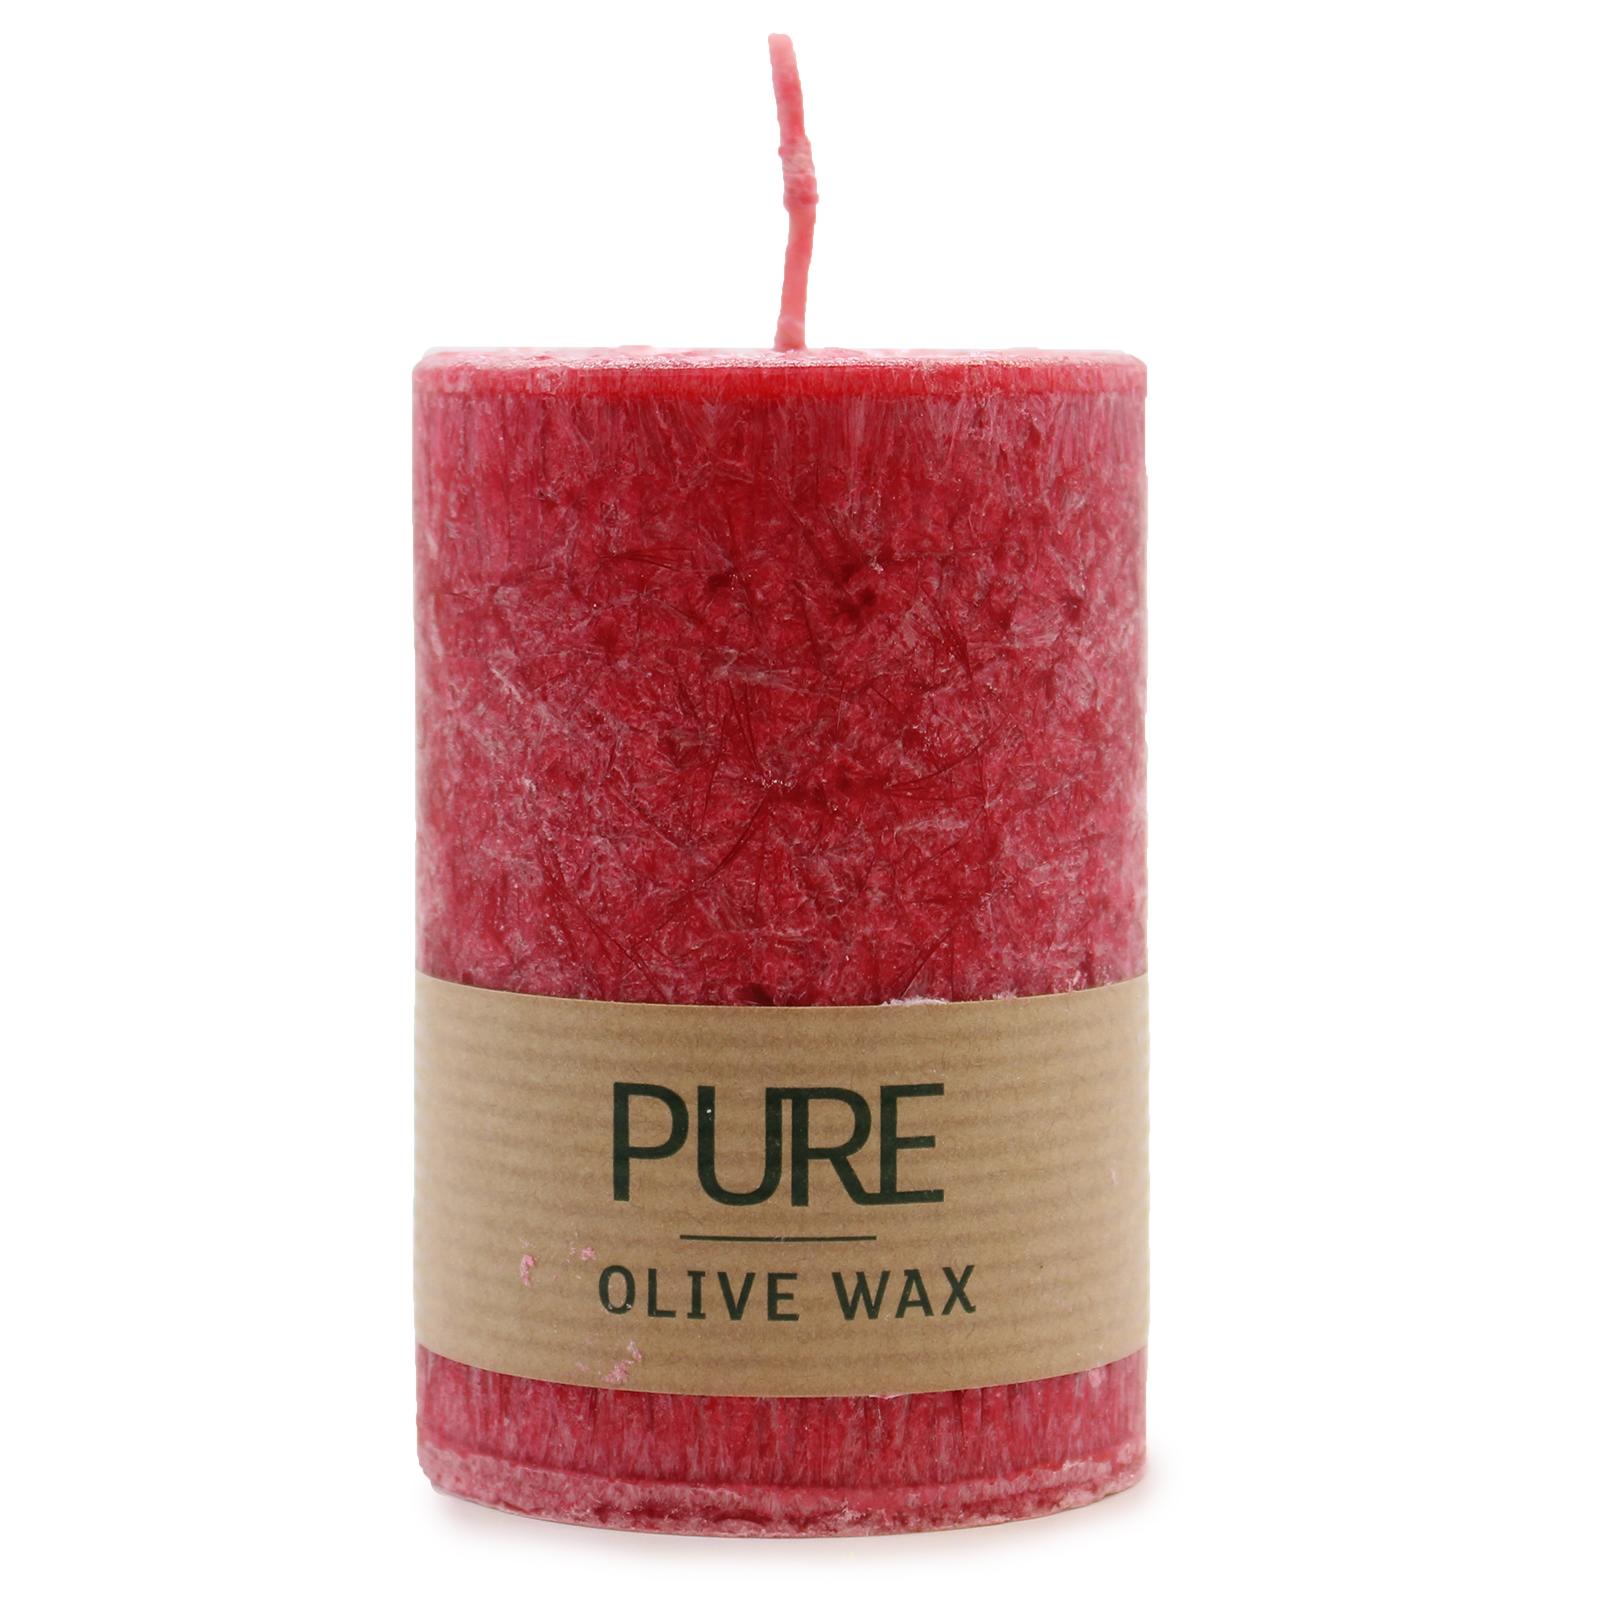 Vegan-Friendly Pure Olive Wax Candle 90x60 - Red